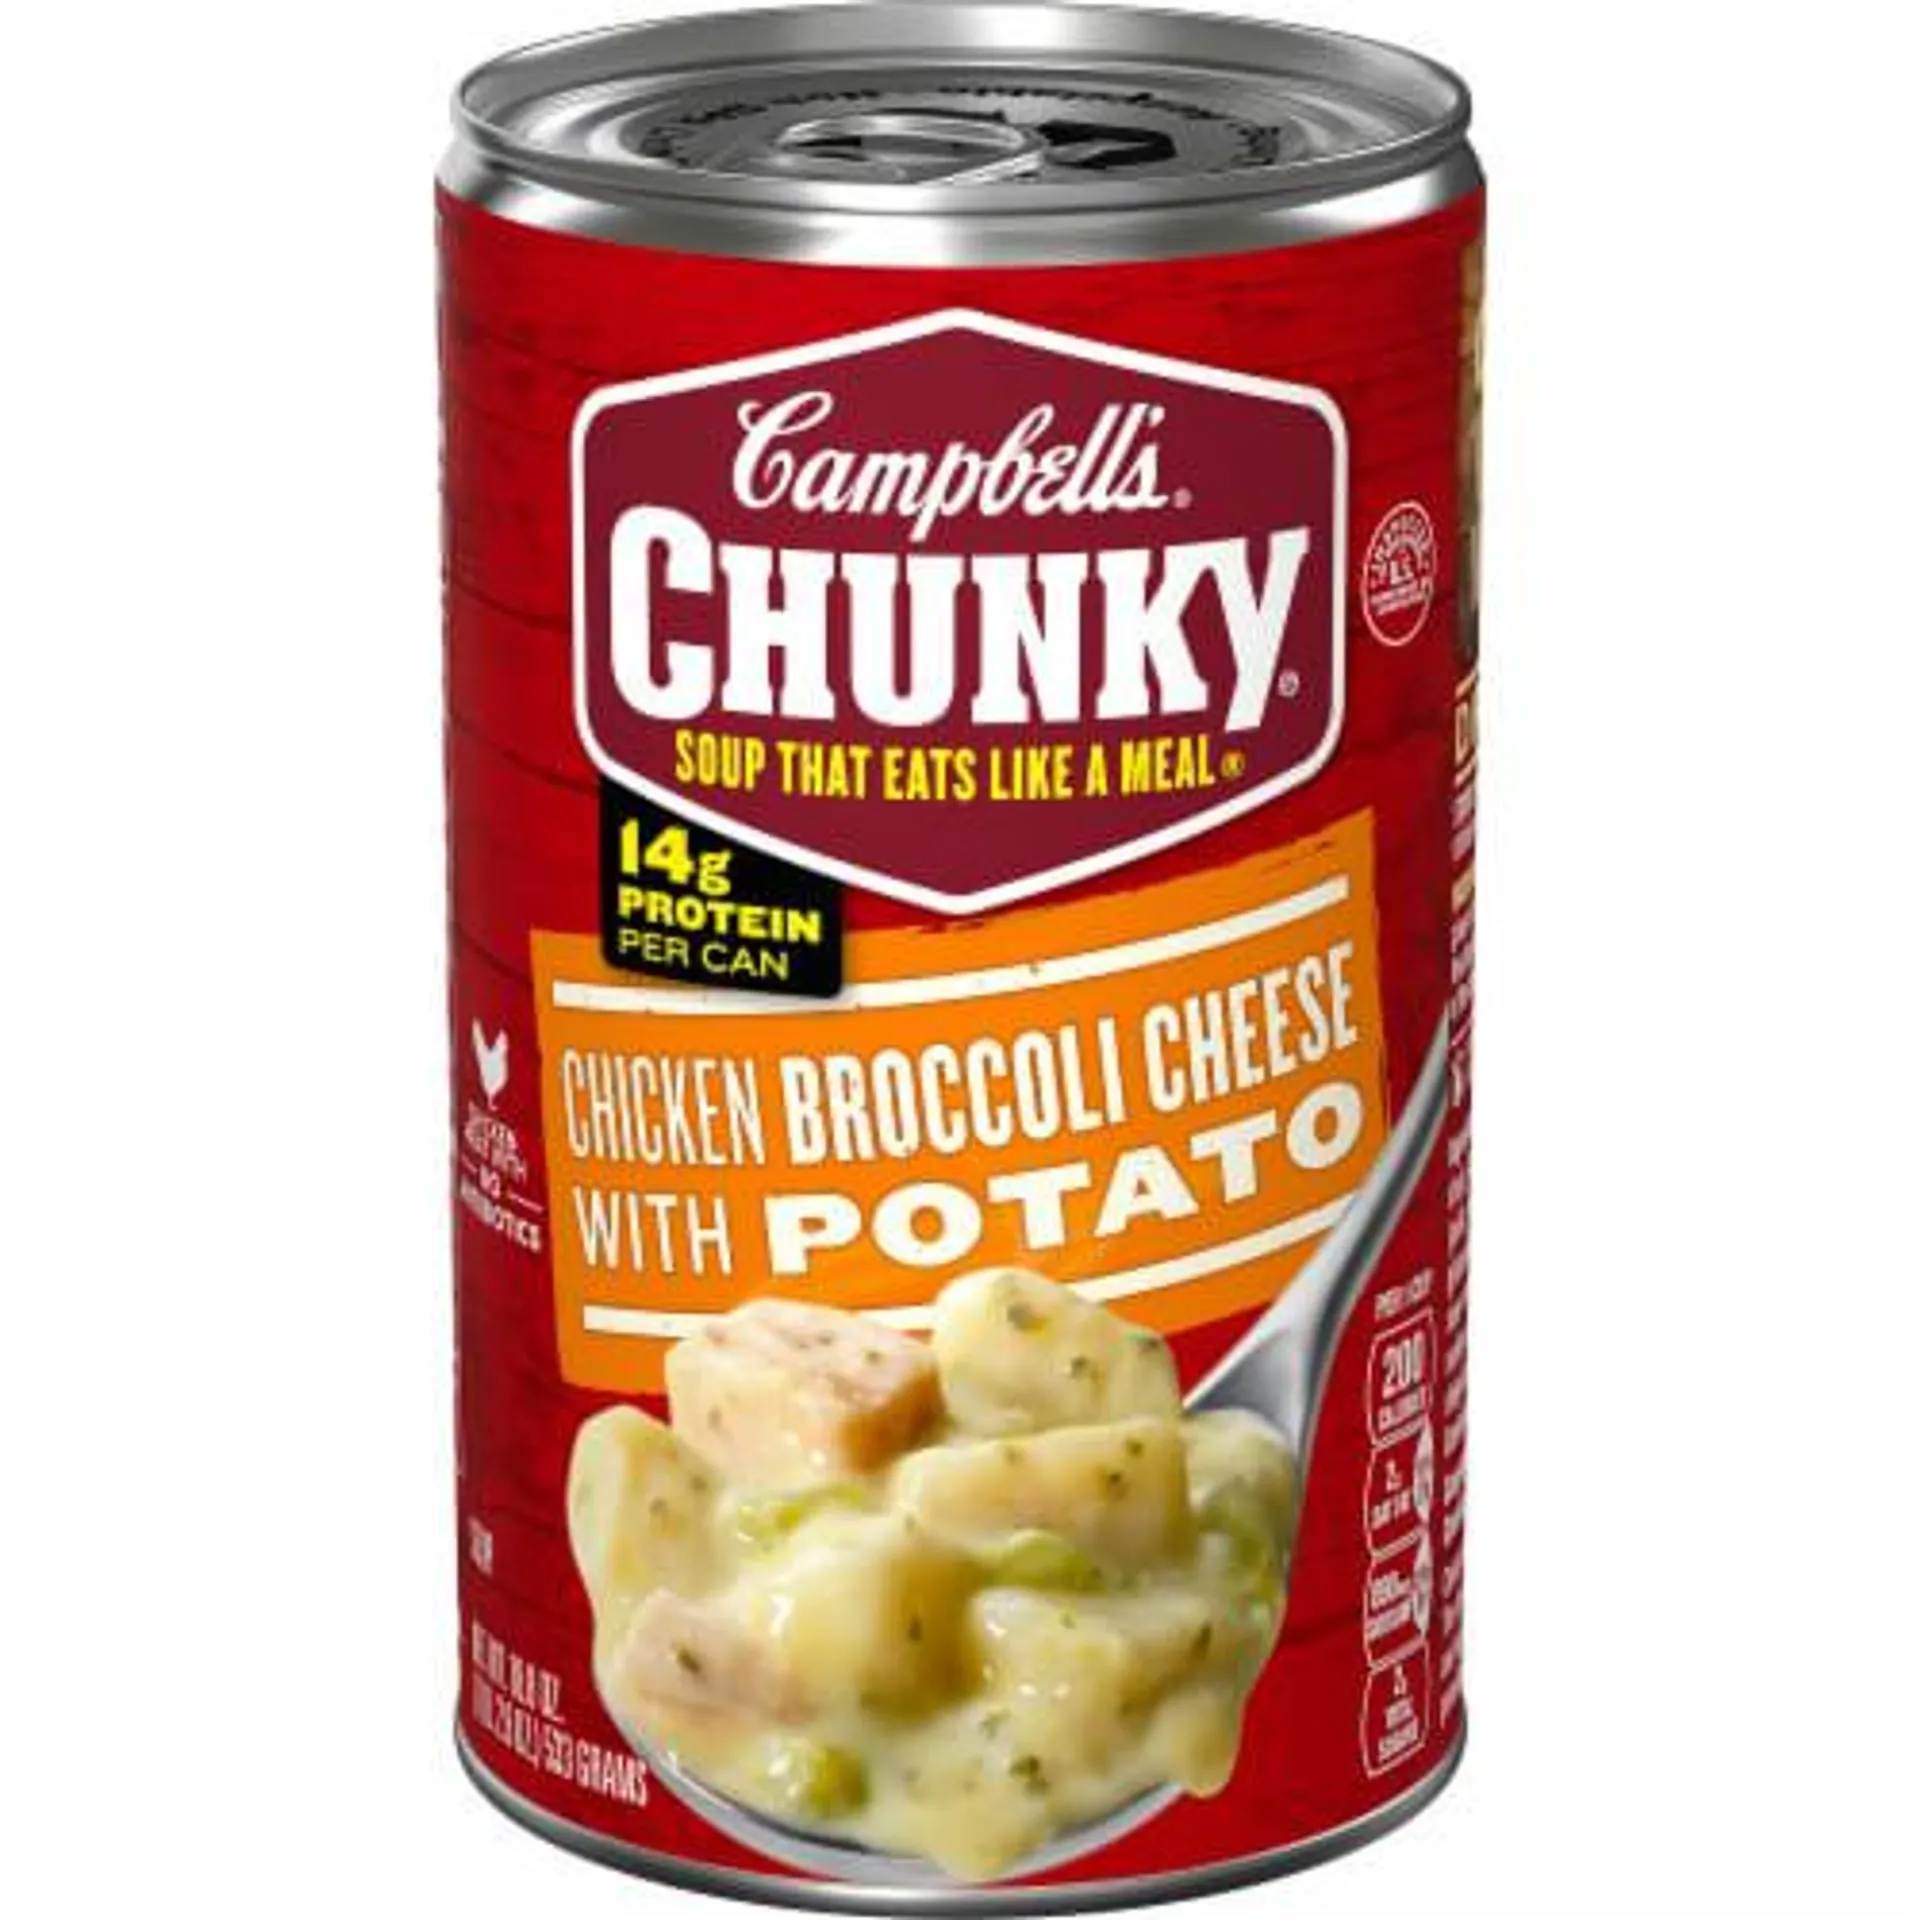 Campbell's Chunky Chicken Broccoli Cheese with Potato Soup